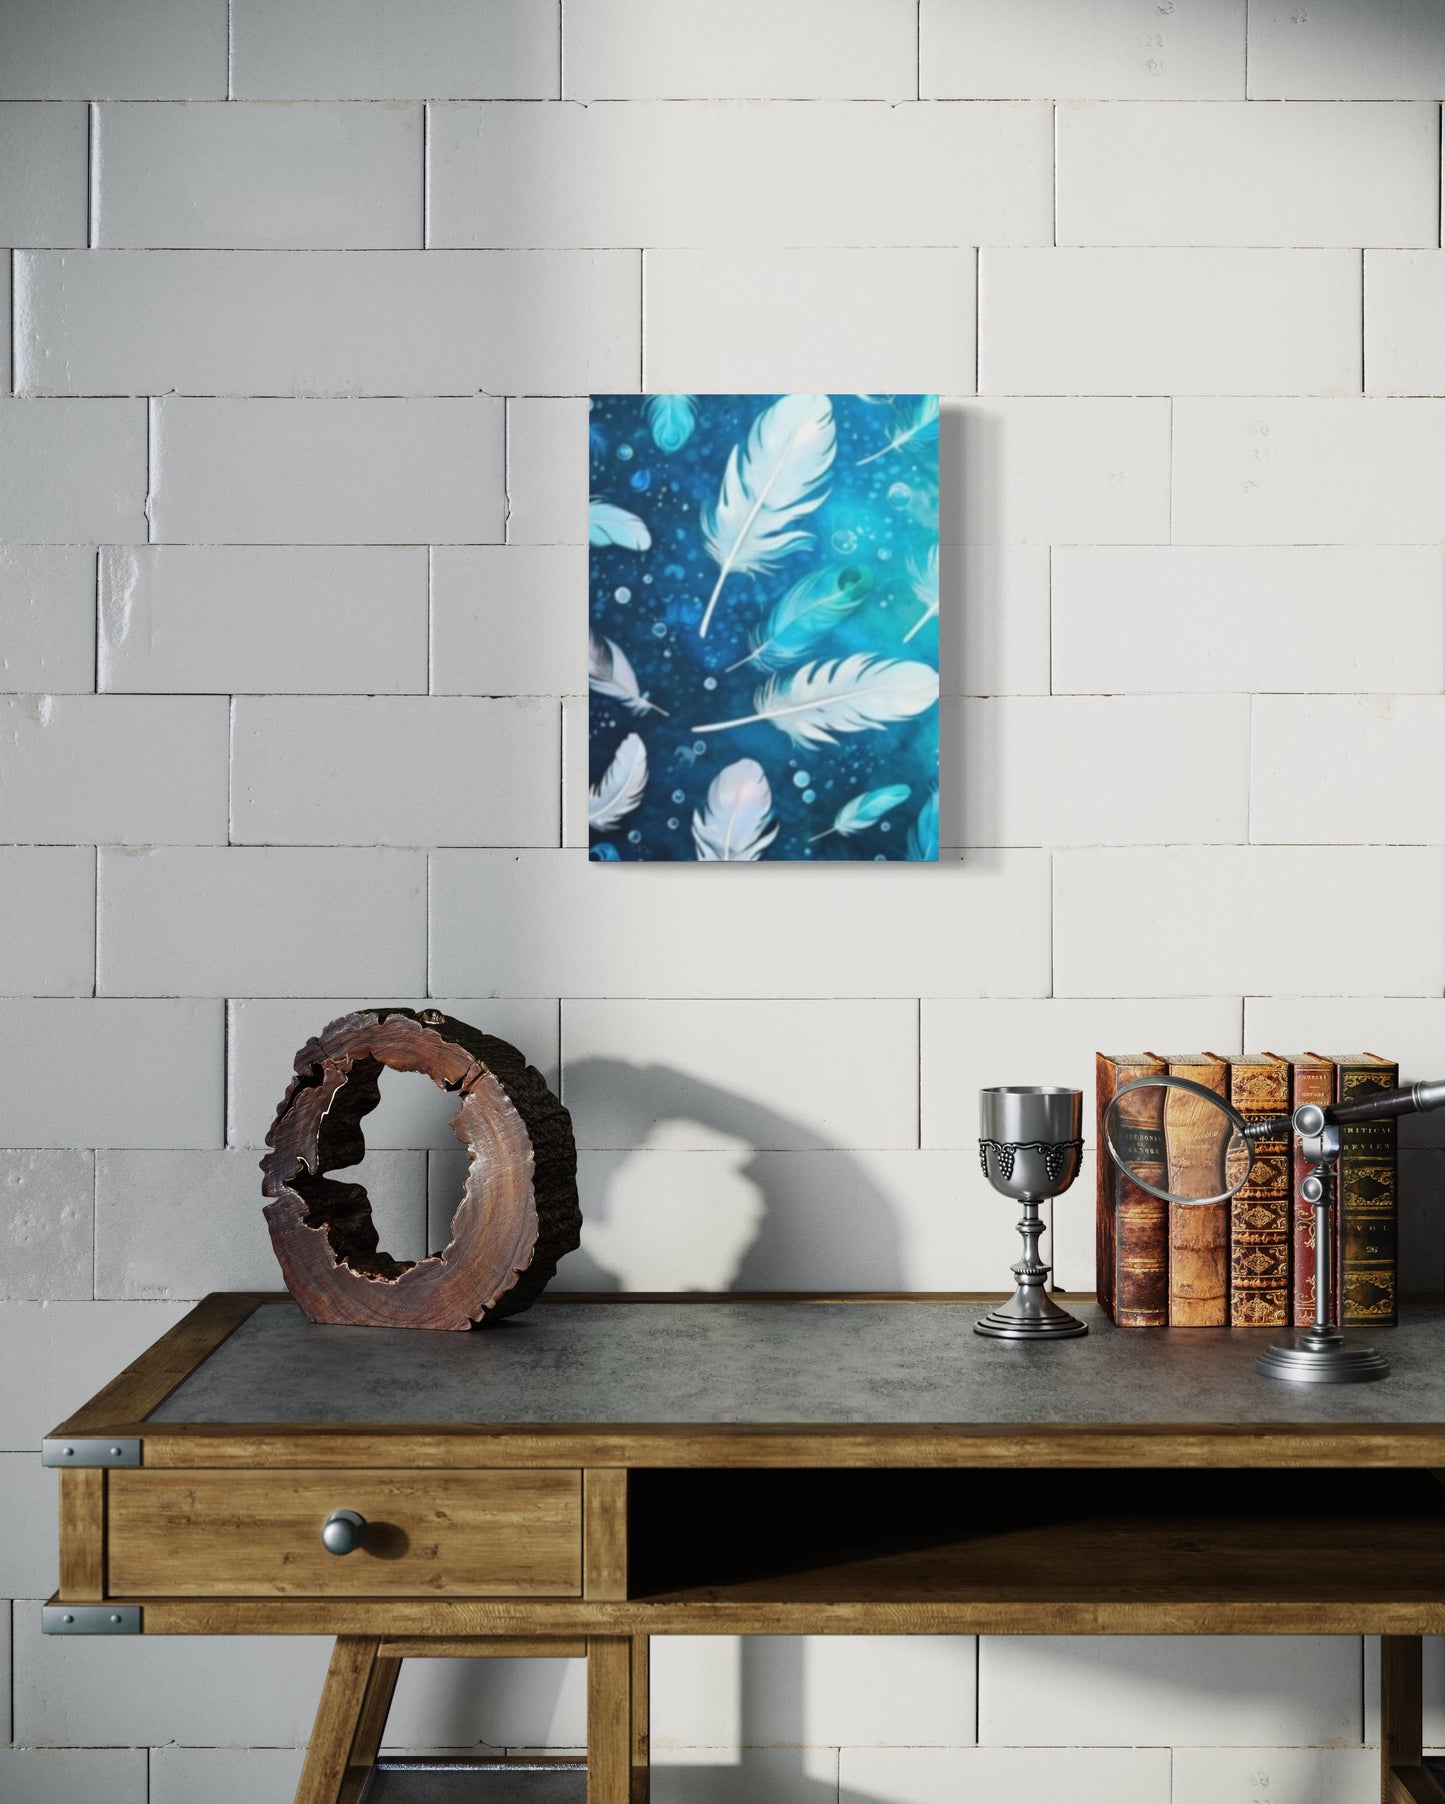 Sea of Feathers Art Canvas Gallery Wraps